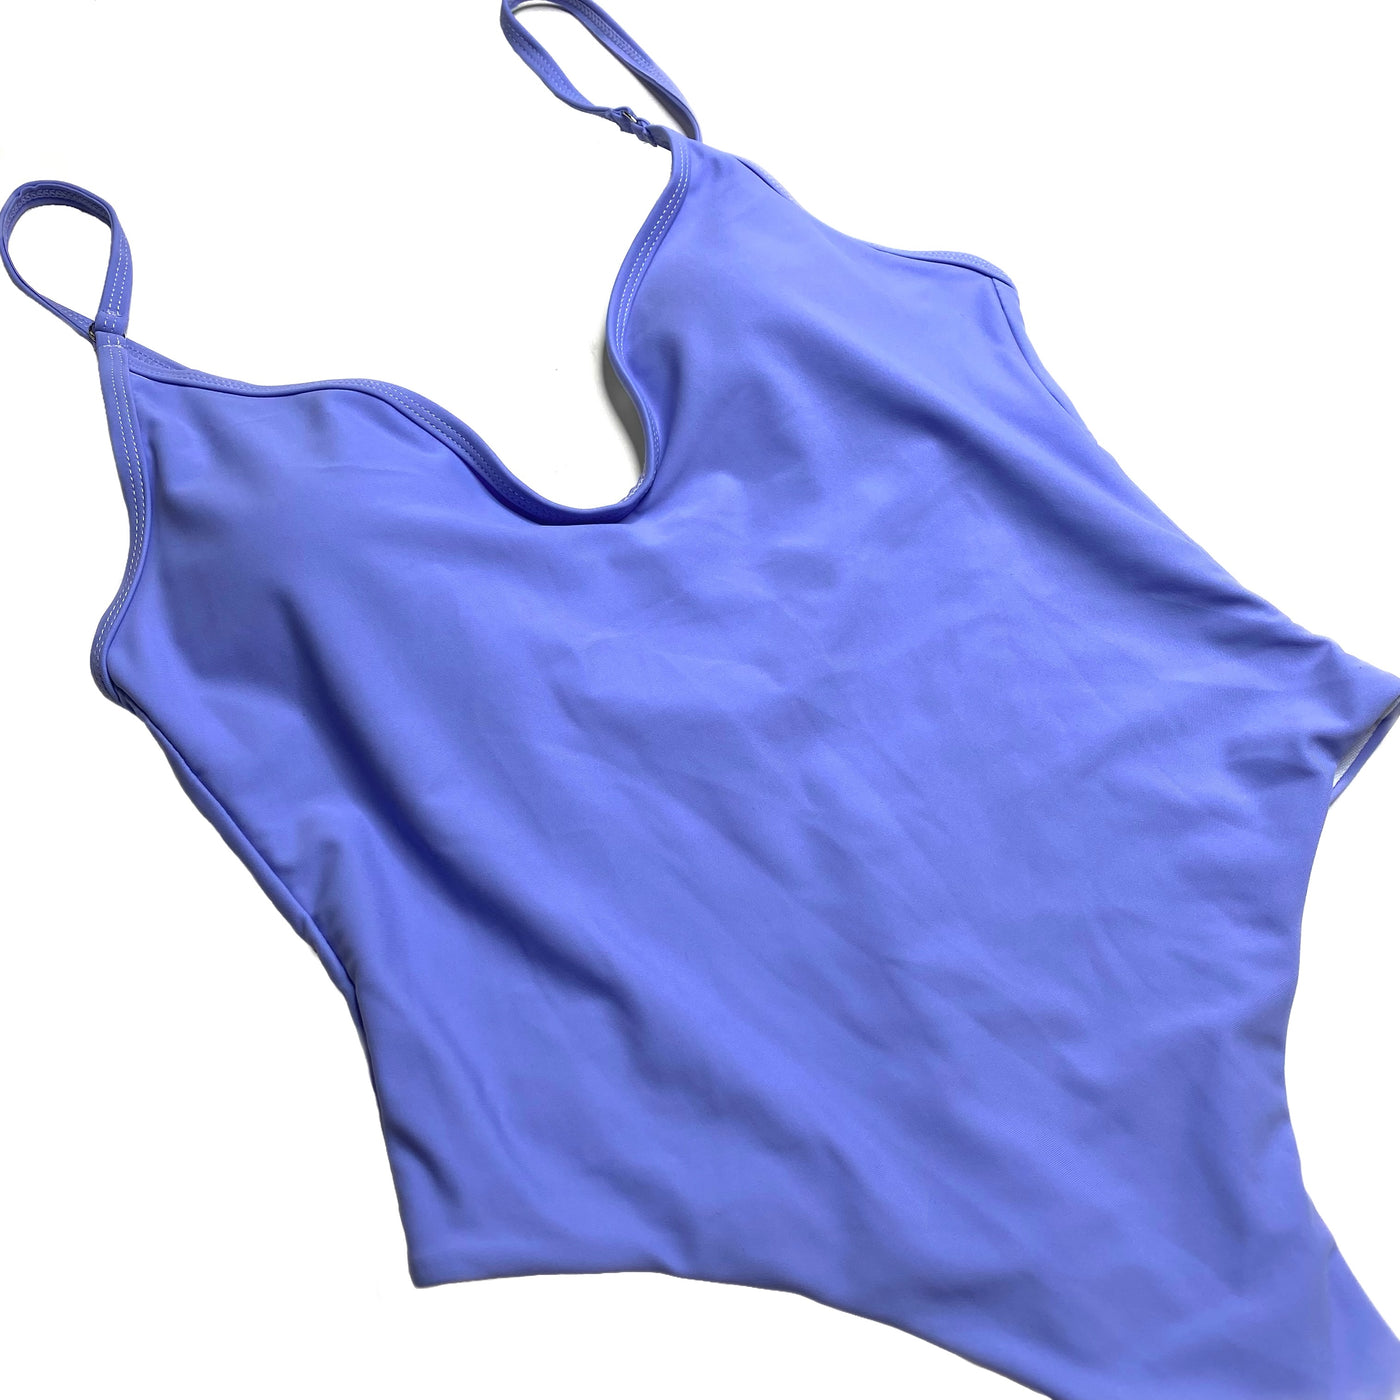 THE BASIC ONE PIECE SWIMSUIT